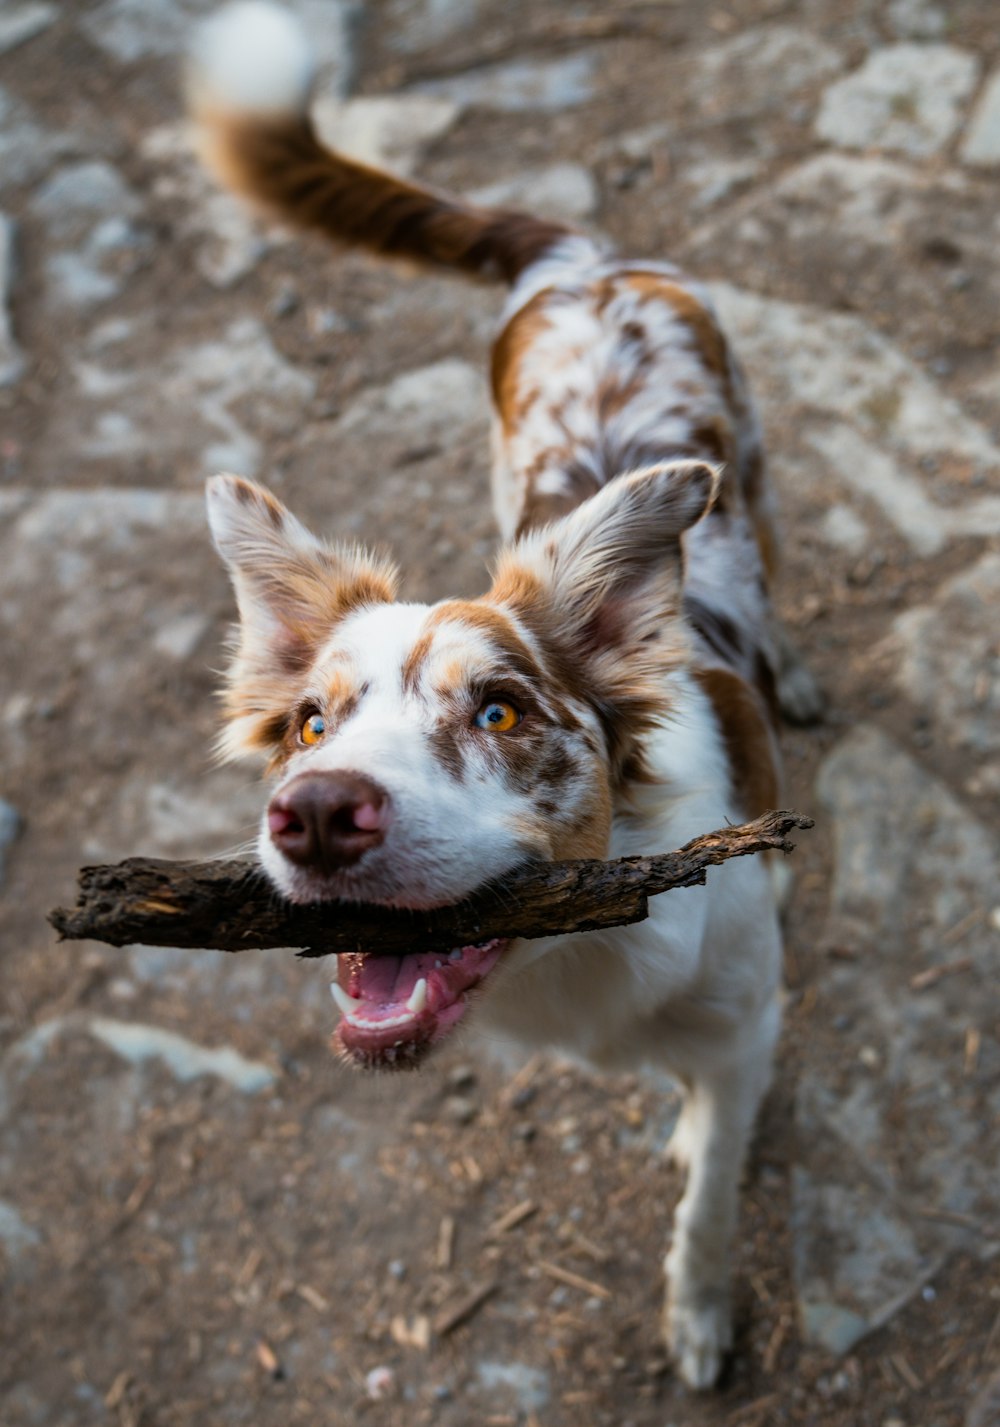 a dog holding a stick in its mouth